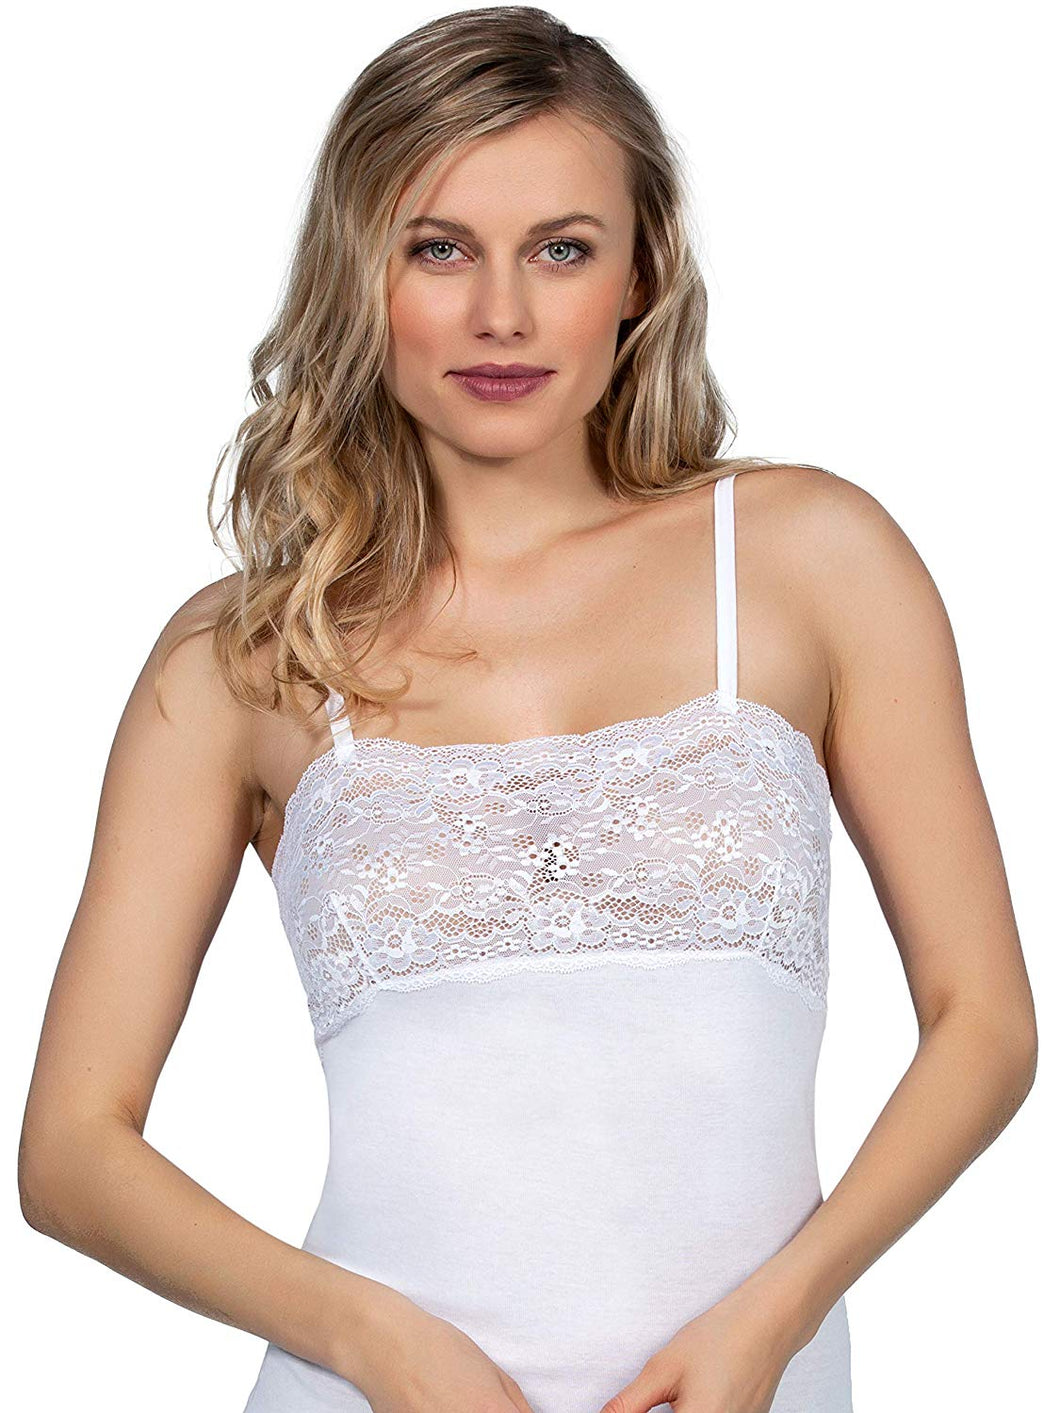 Mare Luxury 100% Mako Cotton Women's Lace-Trimmed Camisole. Proudly Made in Italy.